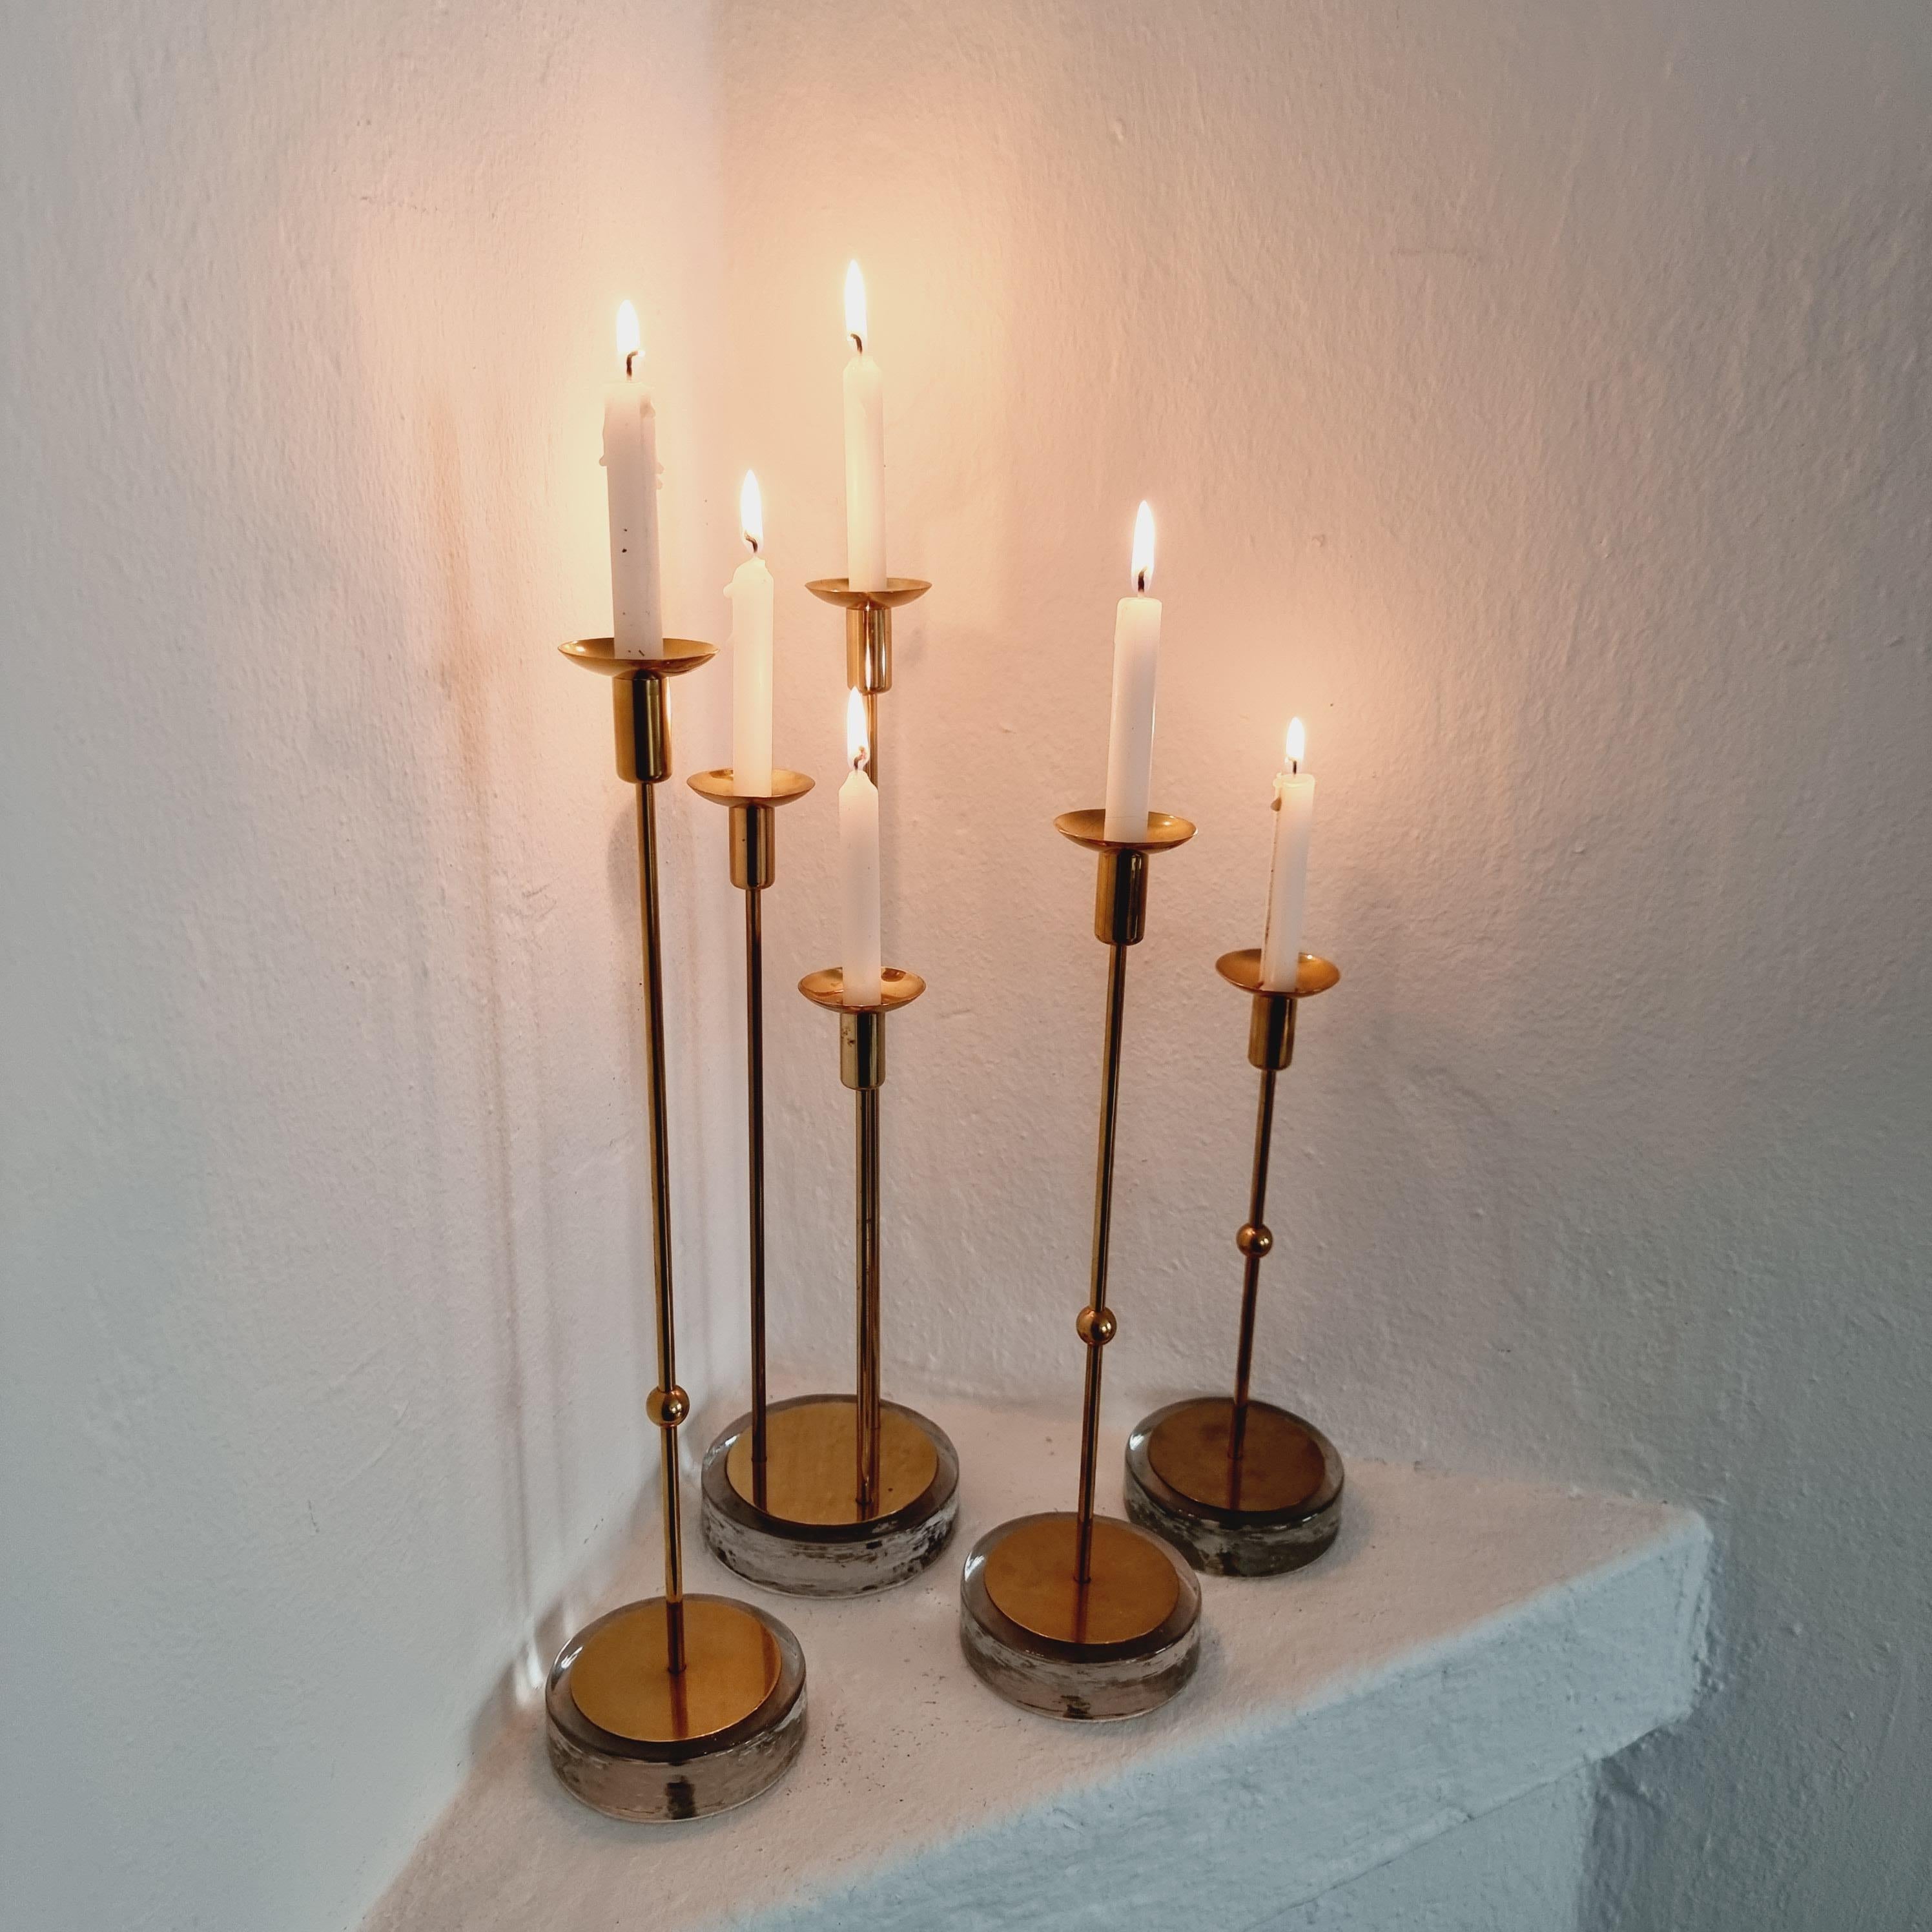 Gunnar Ander, Four Candle Holders, Brass & Glass, Ystad Metall, Swedish Modern For Sale 7